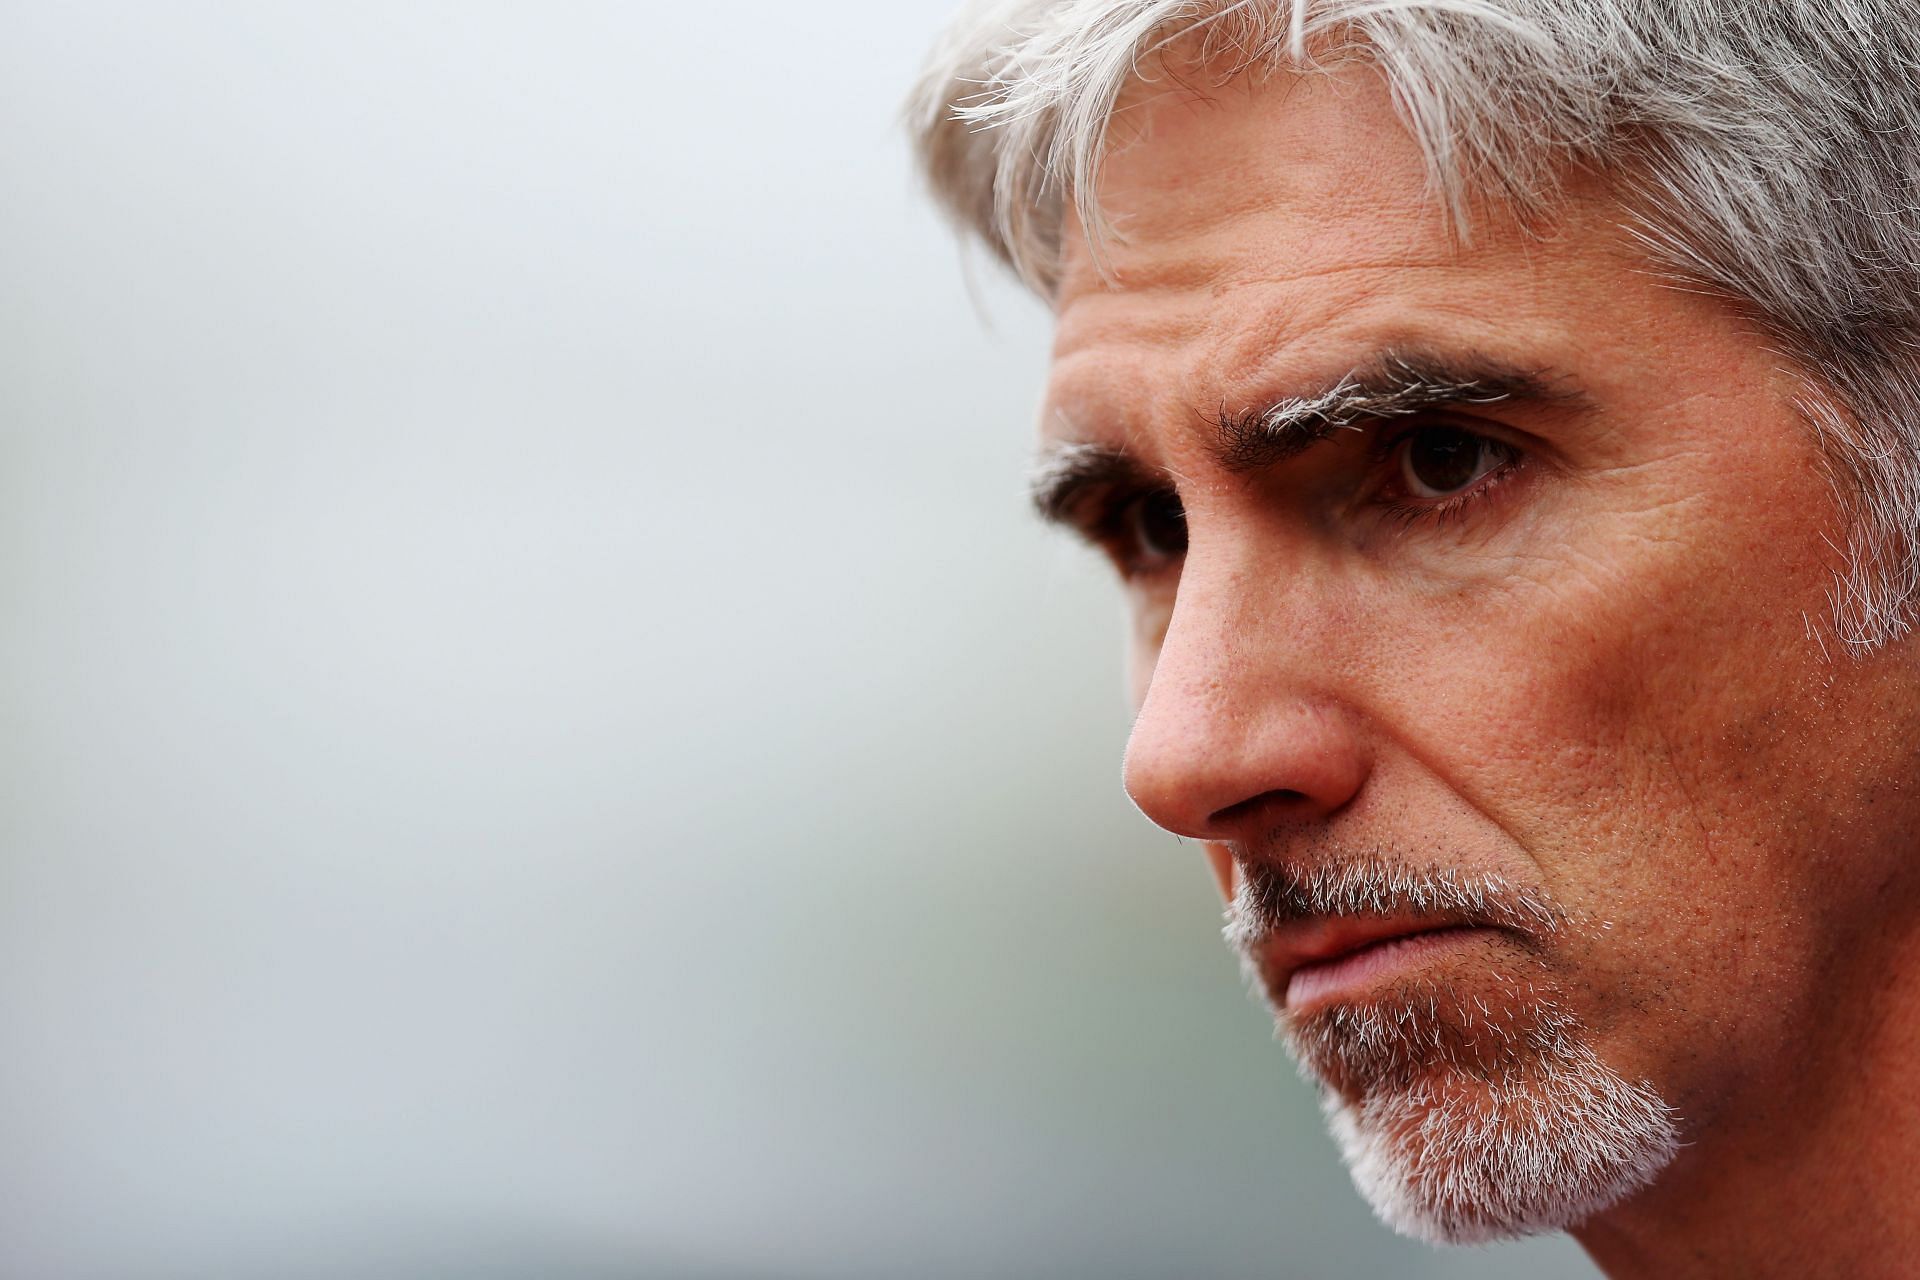 1996 F1 world champion Damon Hill is seen during qualifying for the 2019 Canadian GP (Photo by Mark Thompson/Getty Images)